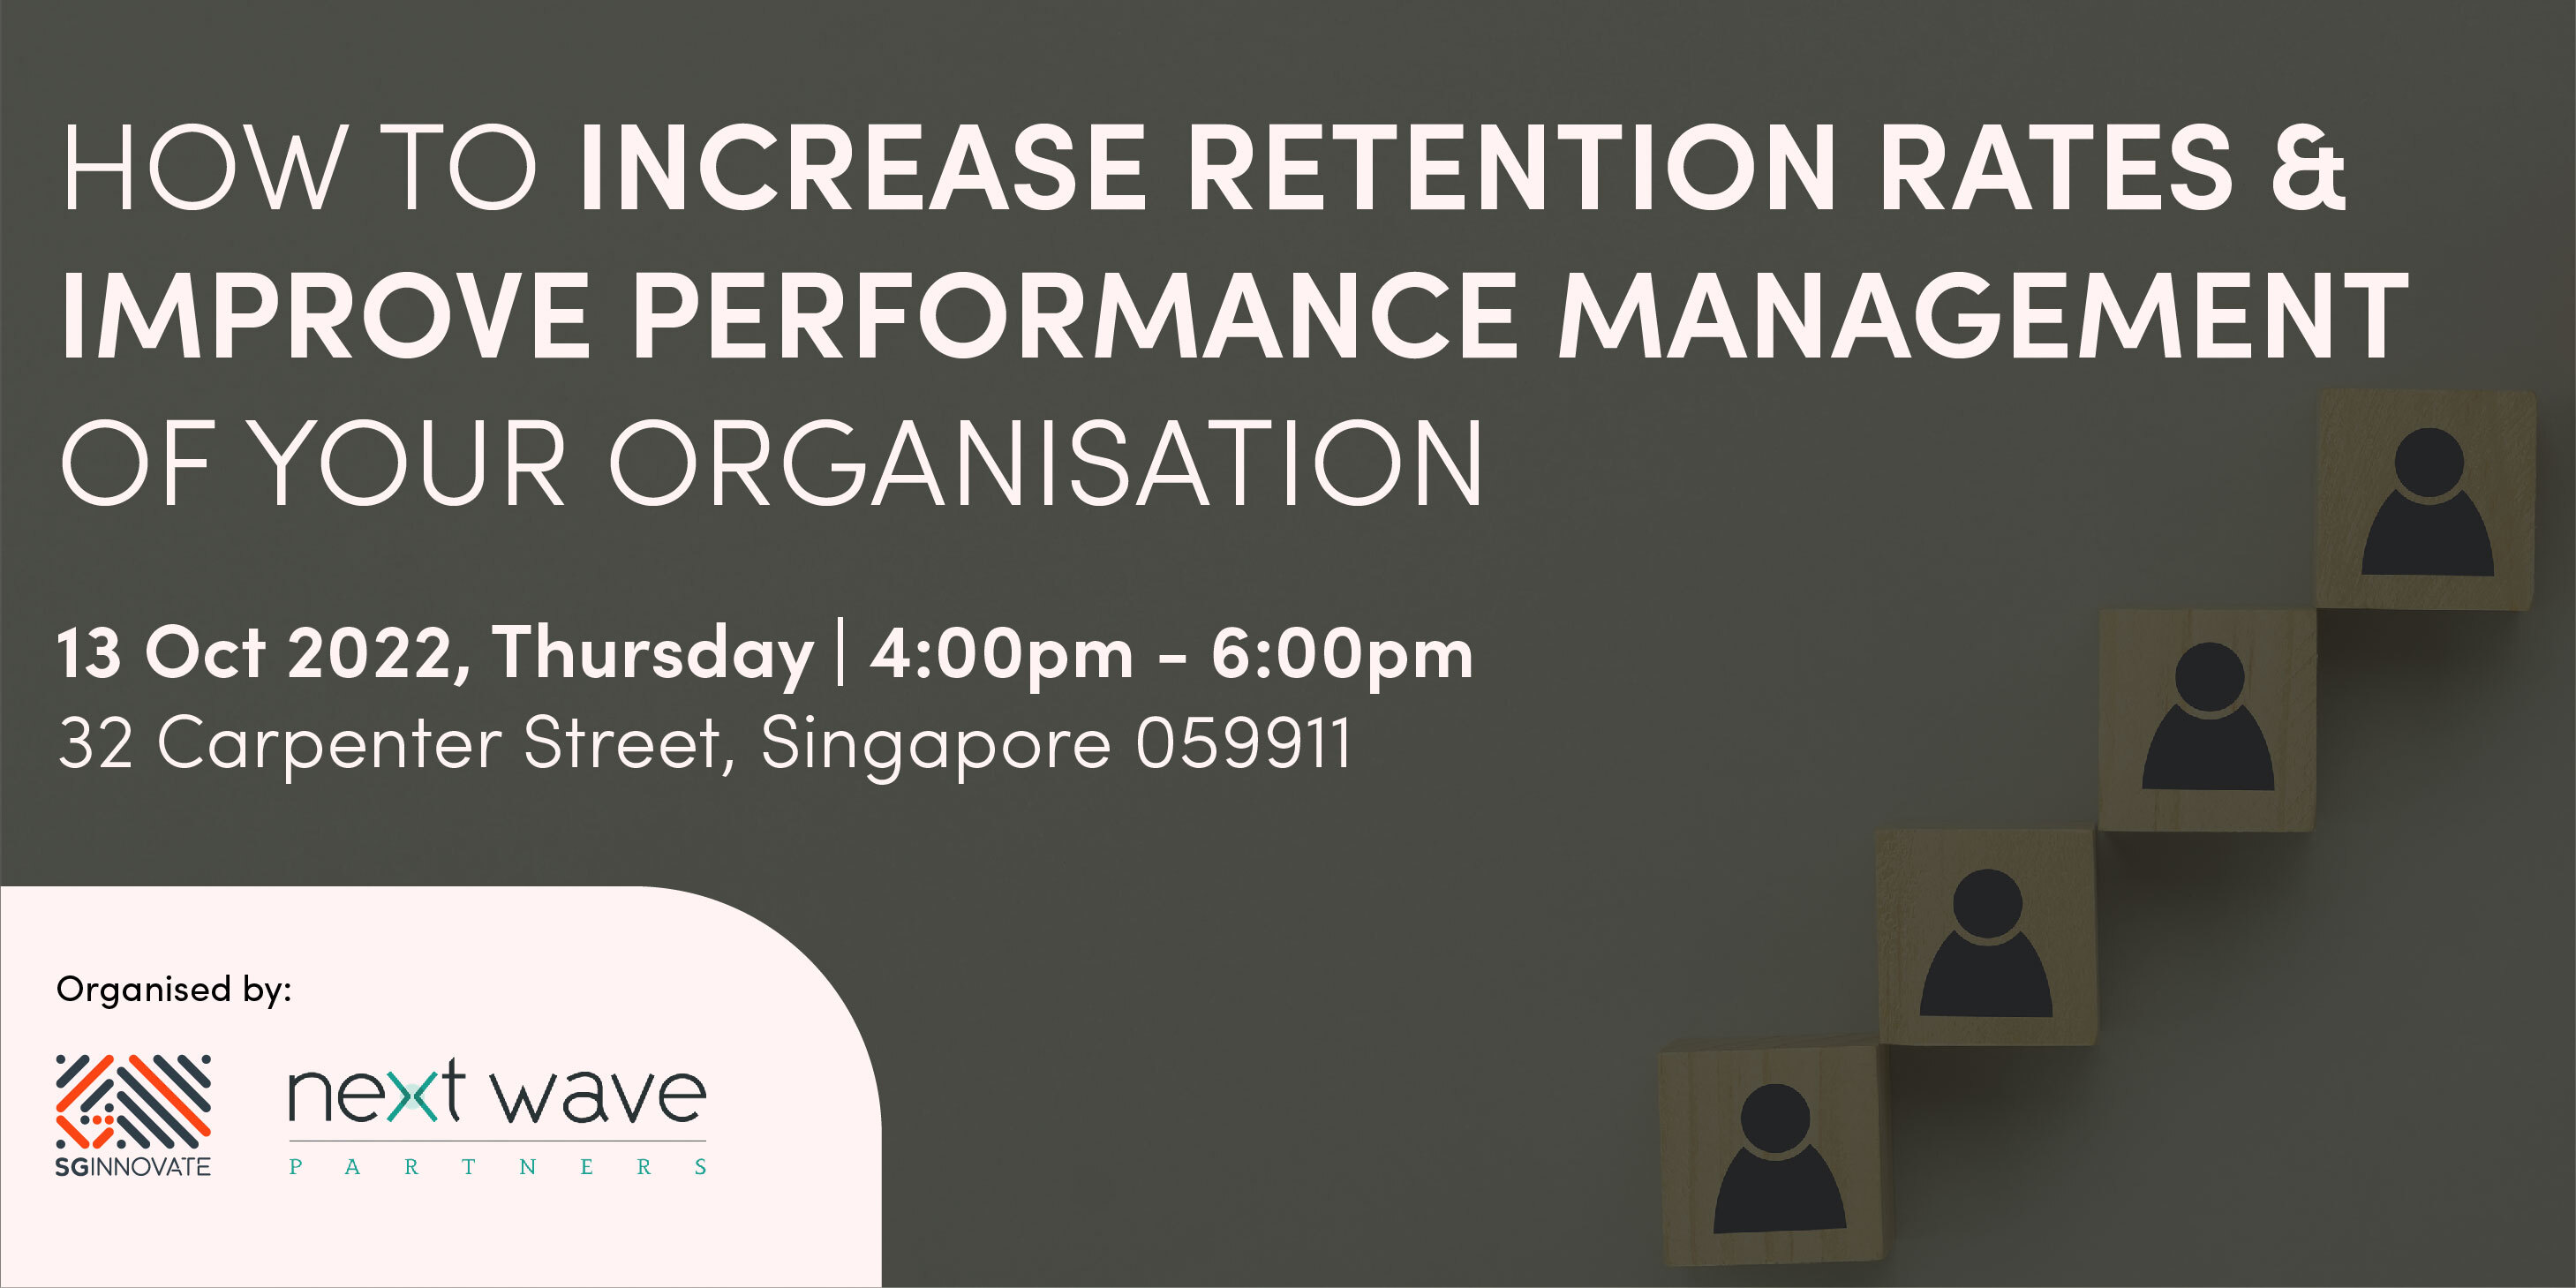 How To Increase Retention Rates & Improve Performance Management Of Your Organisation